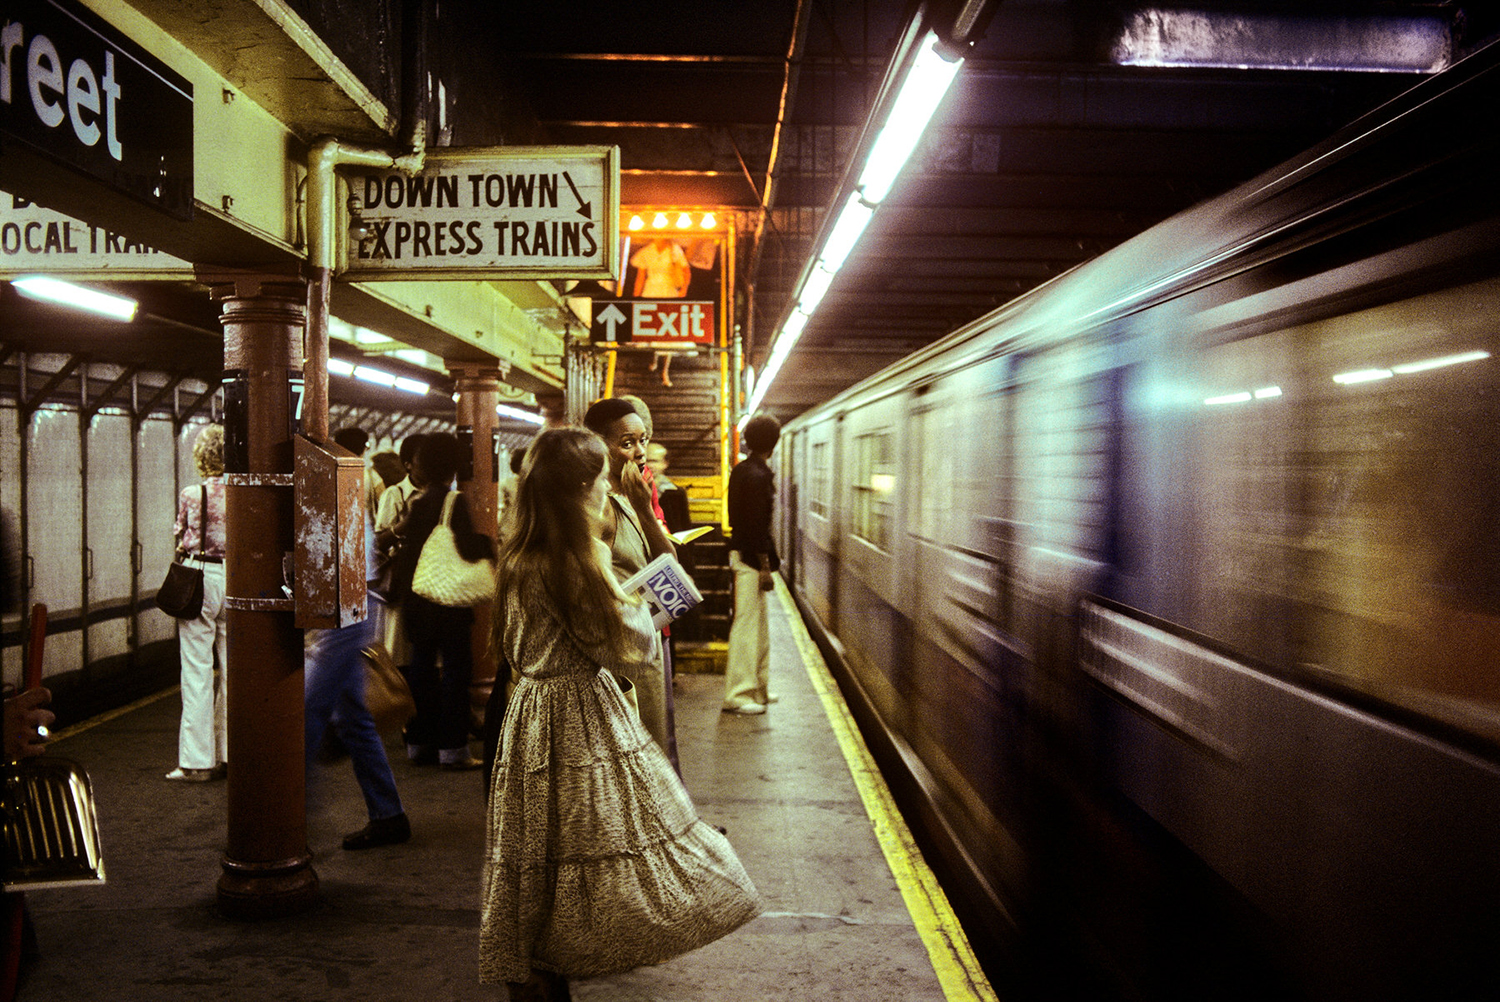 Downtown Express 72nd St. Station, Subway New York, 1977